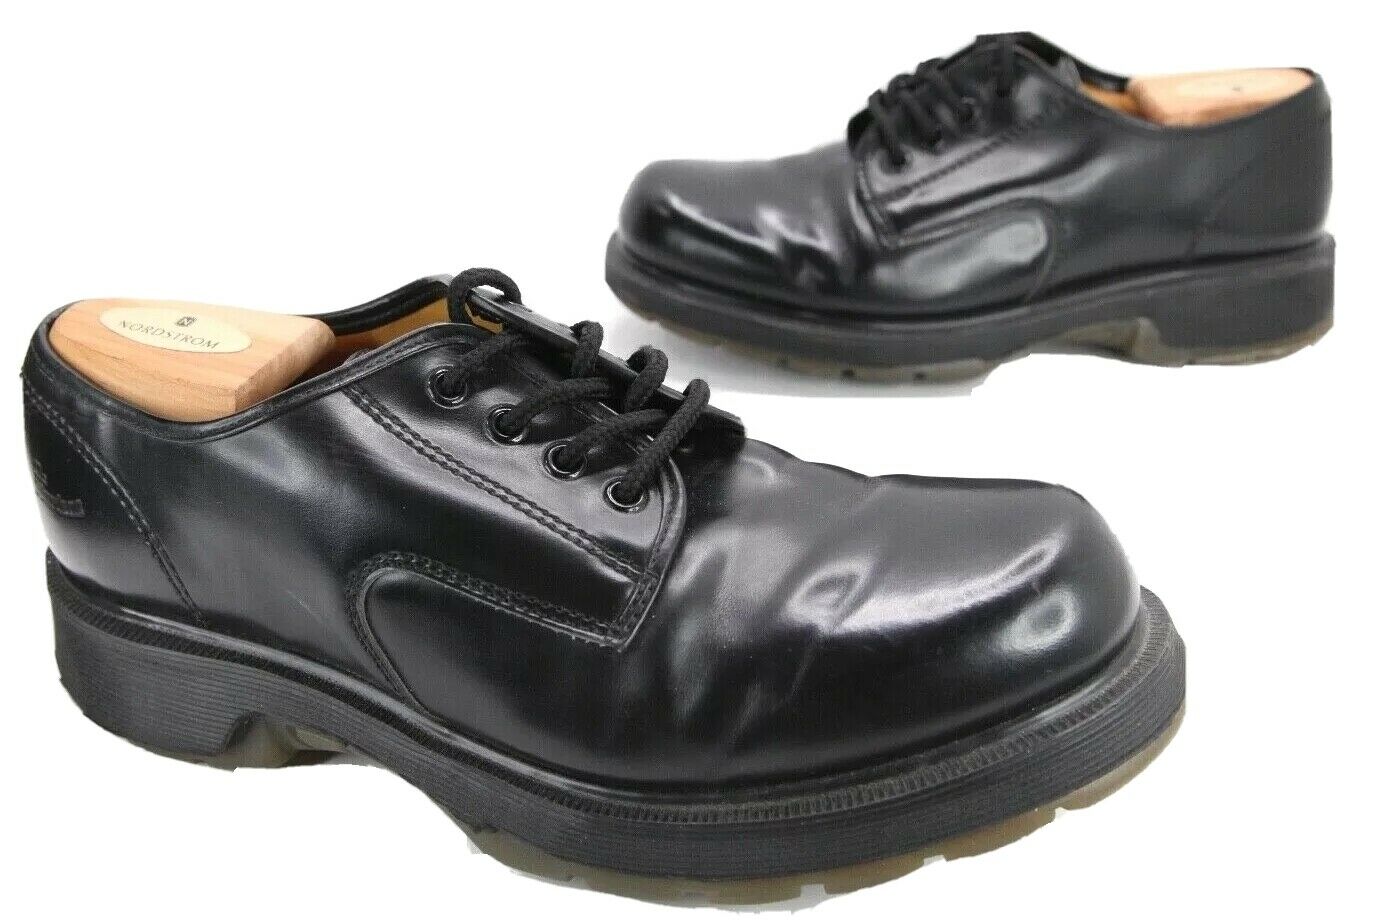 Dr. Martens Vintage NP9C Oxford Shoes Size 9 Smooth Black Made in England